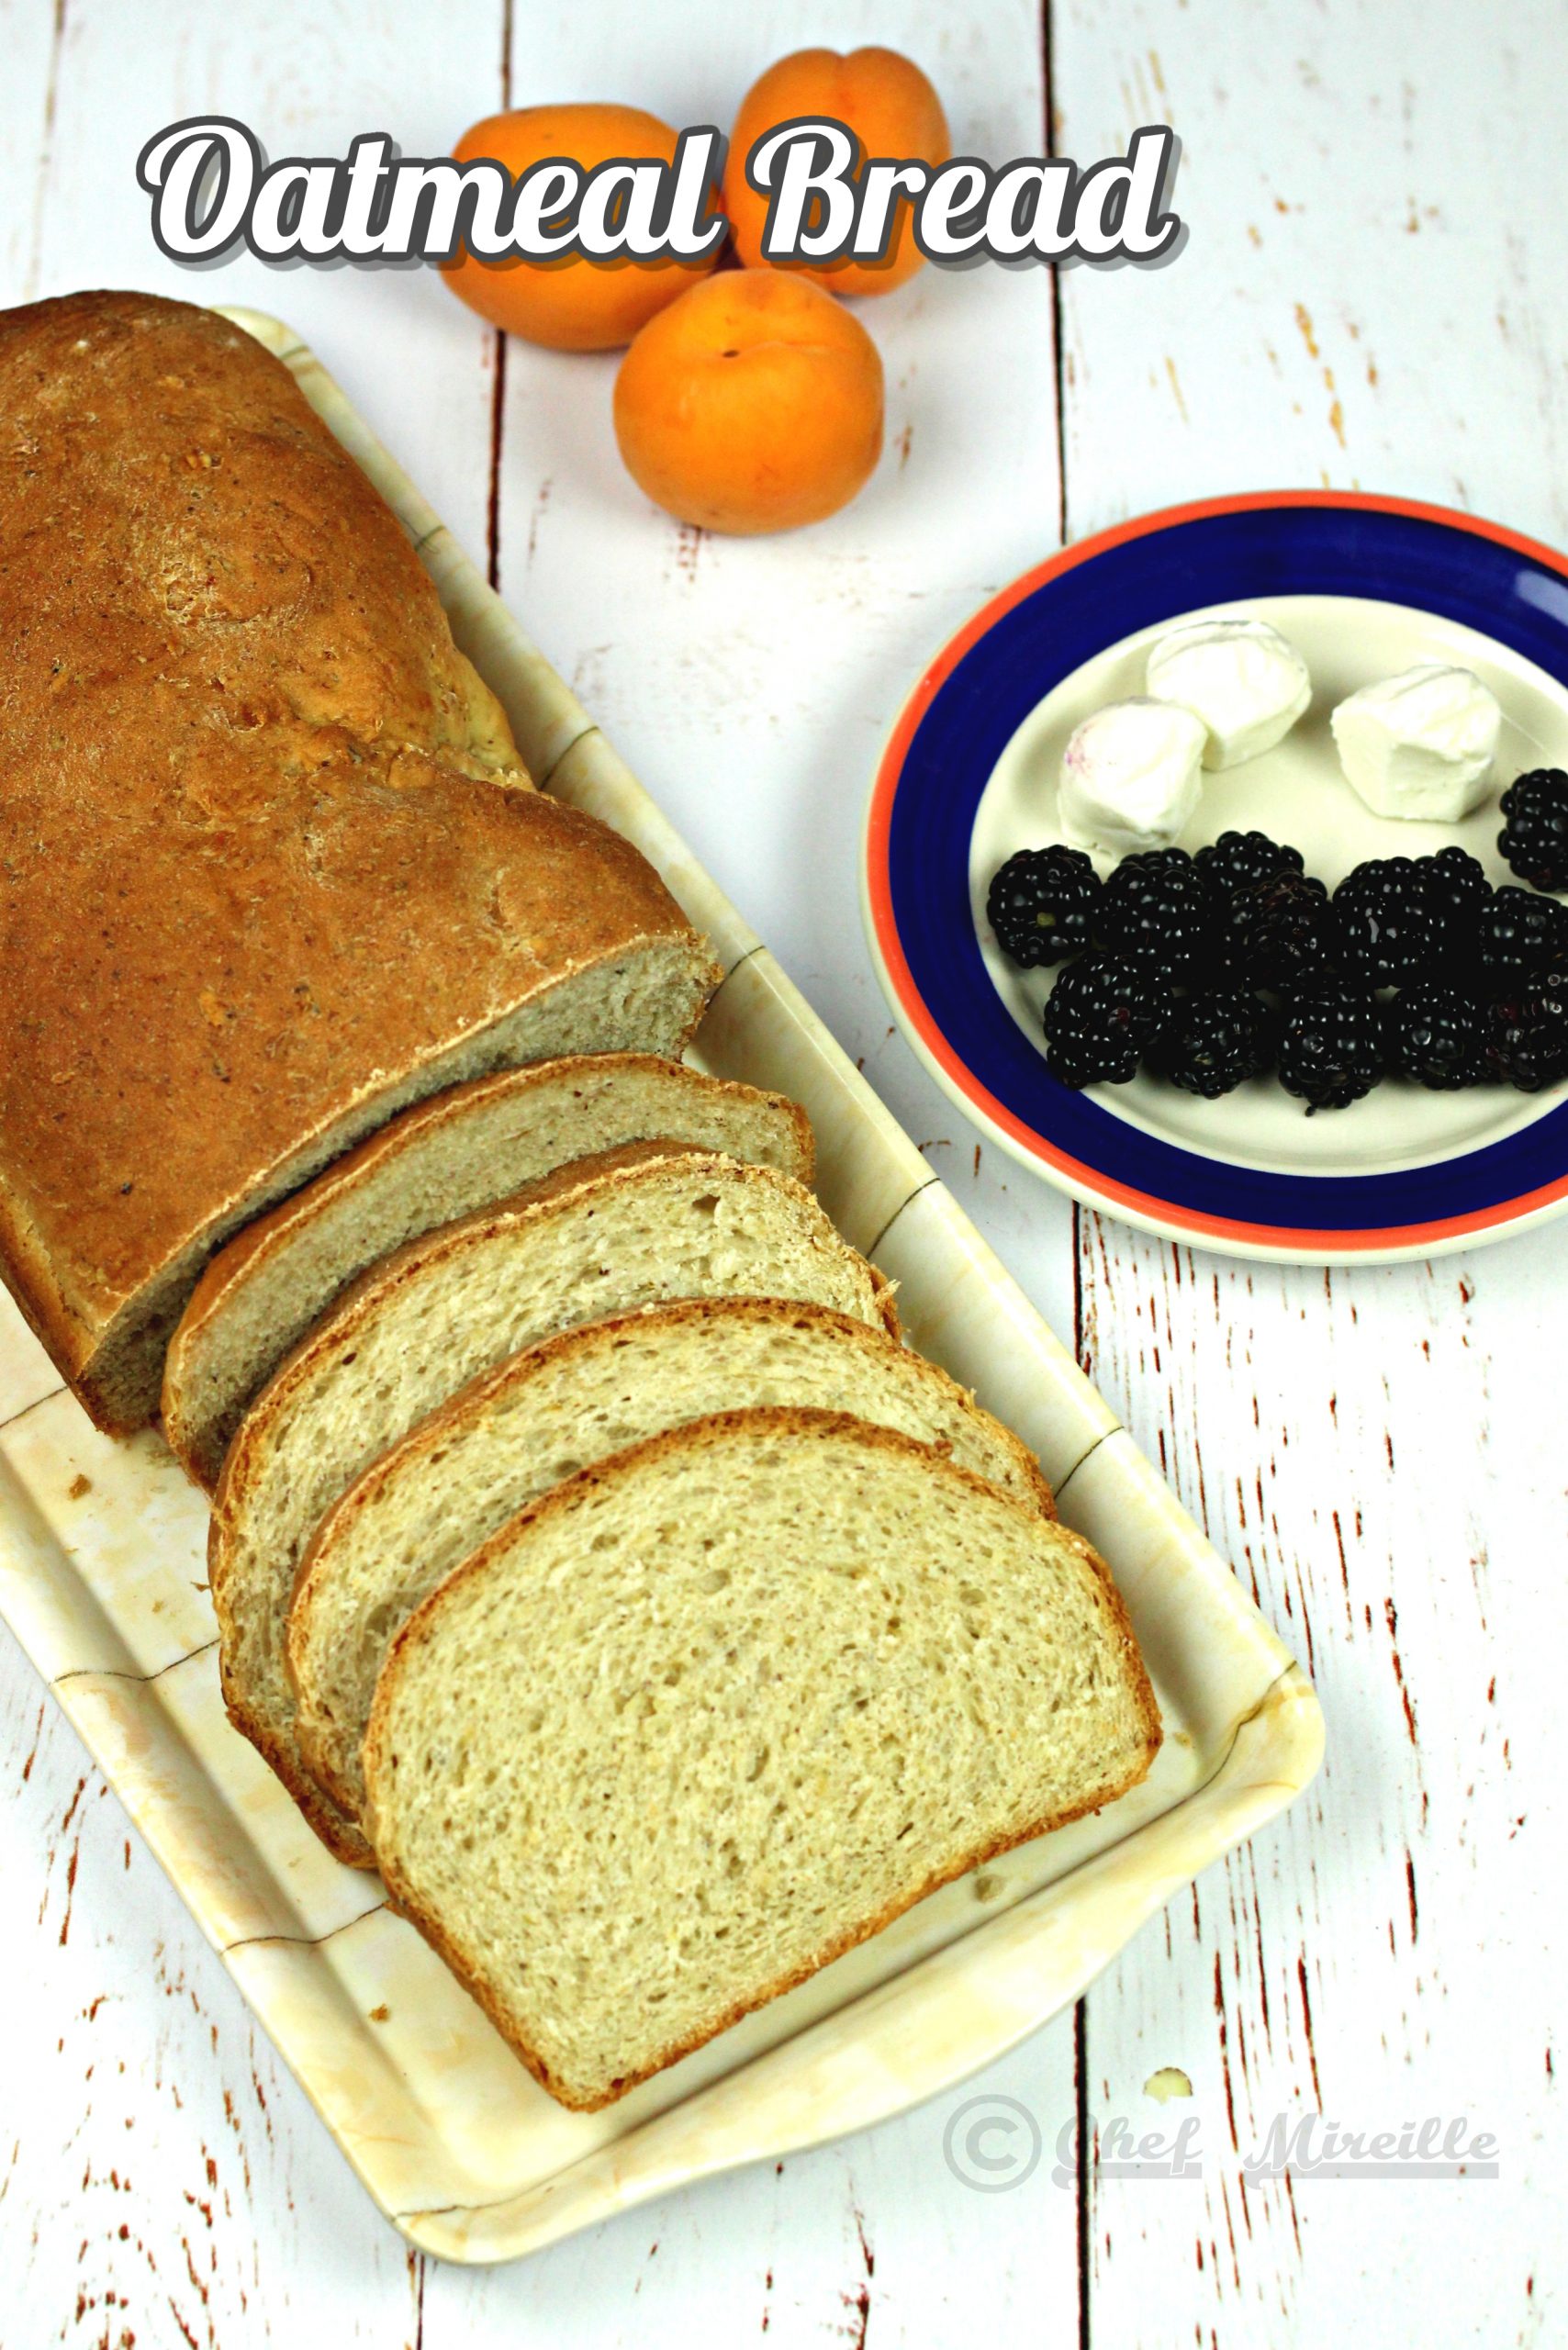 Oatmeal bread with fruit and cheese